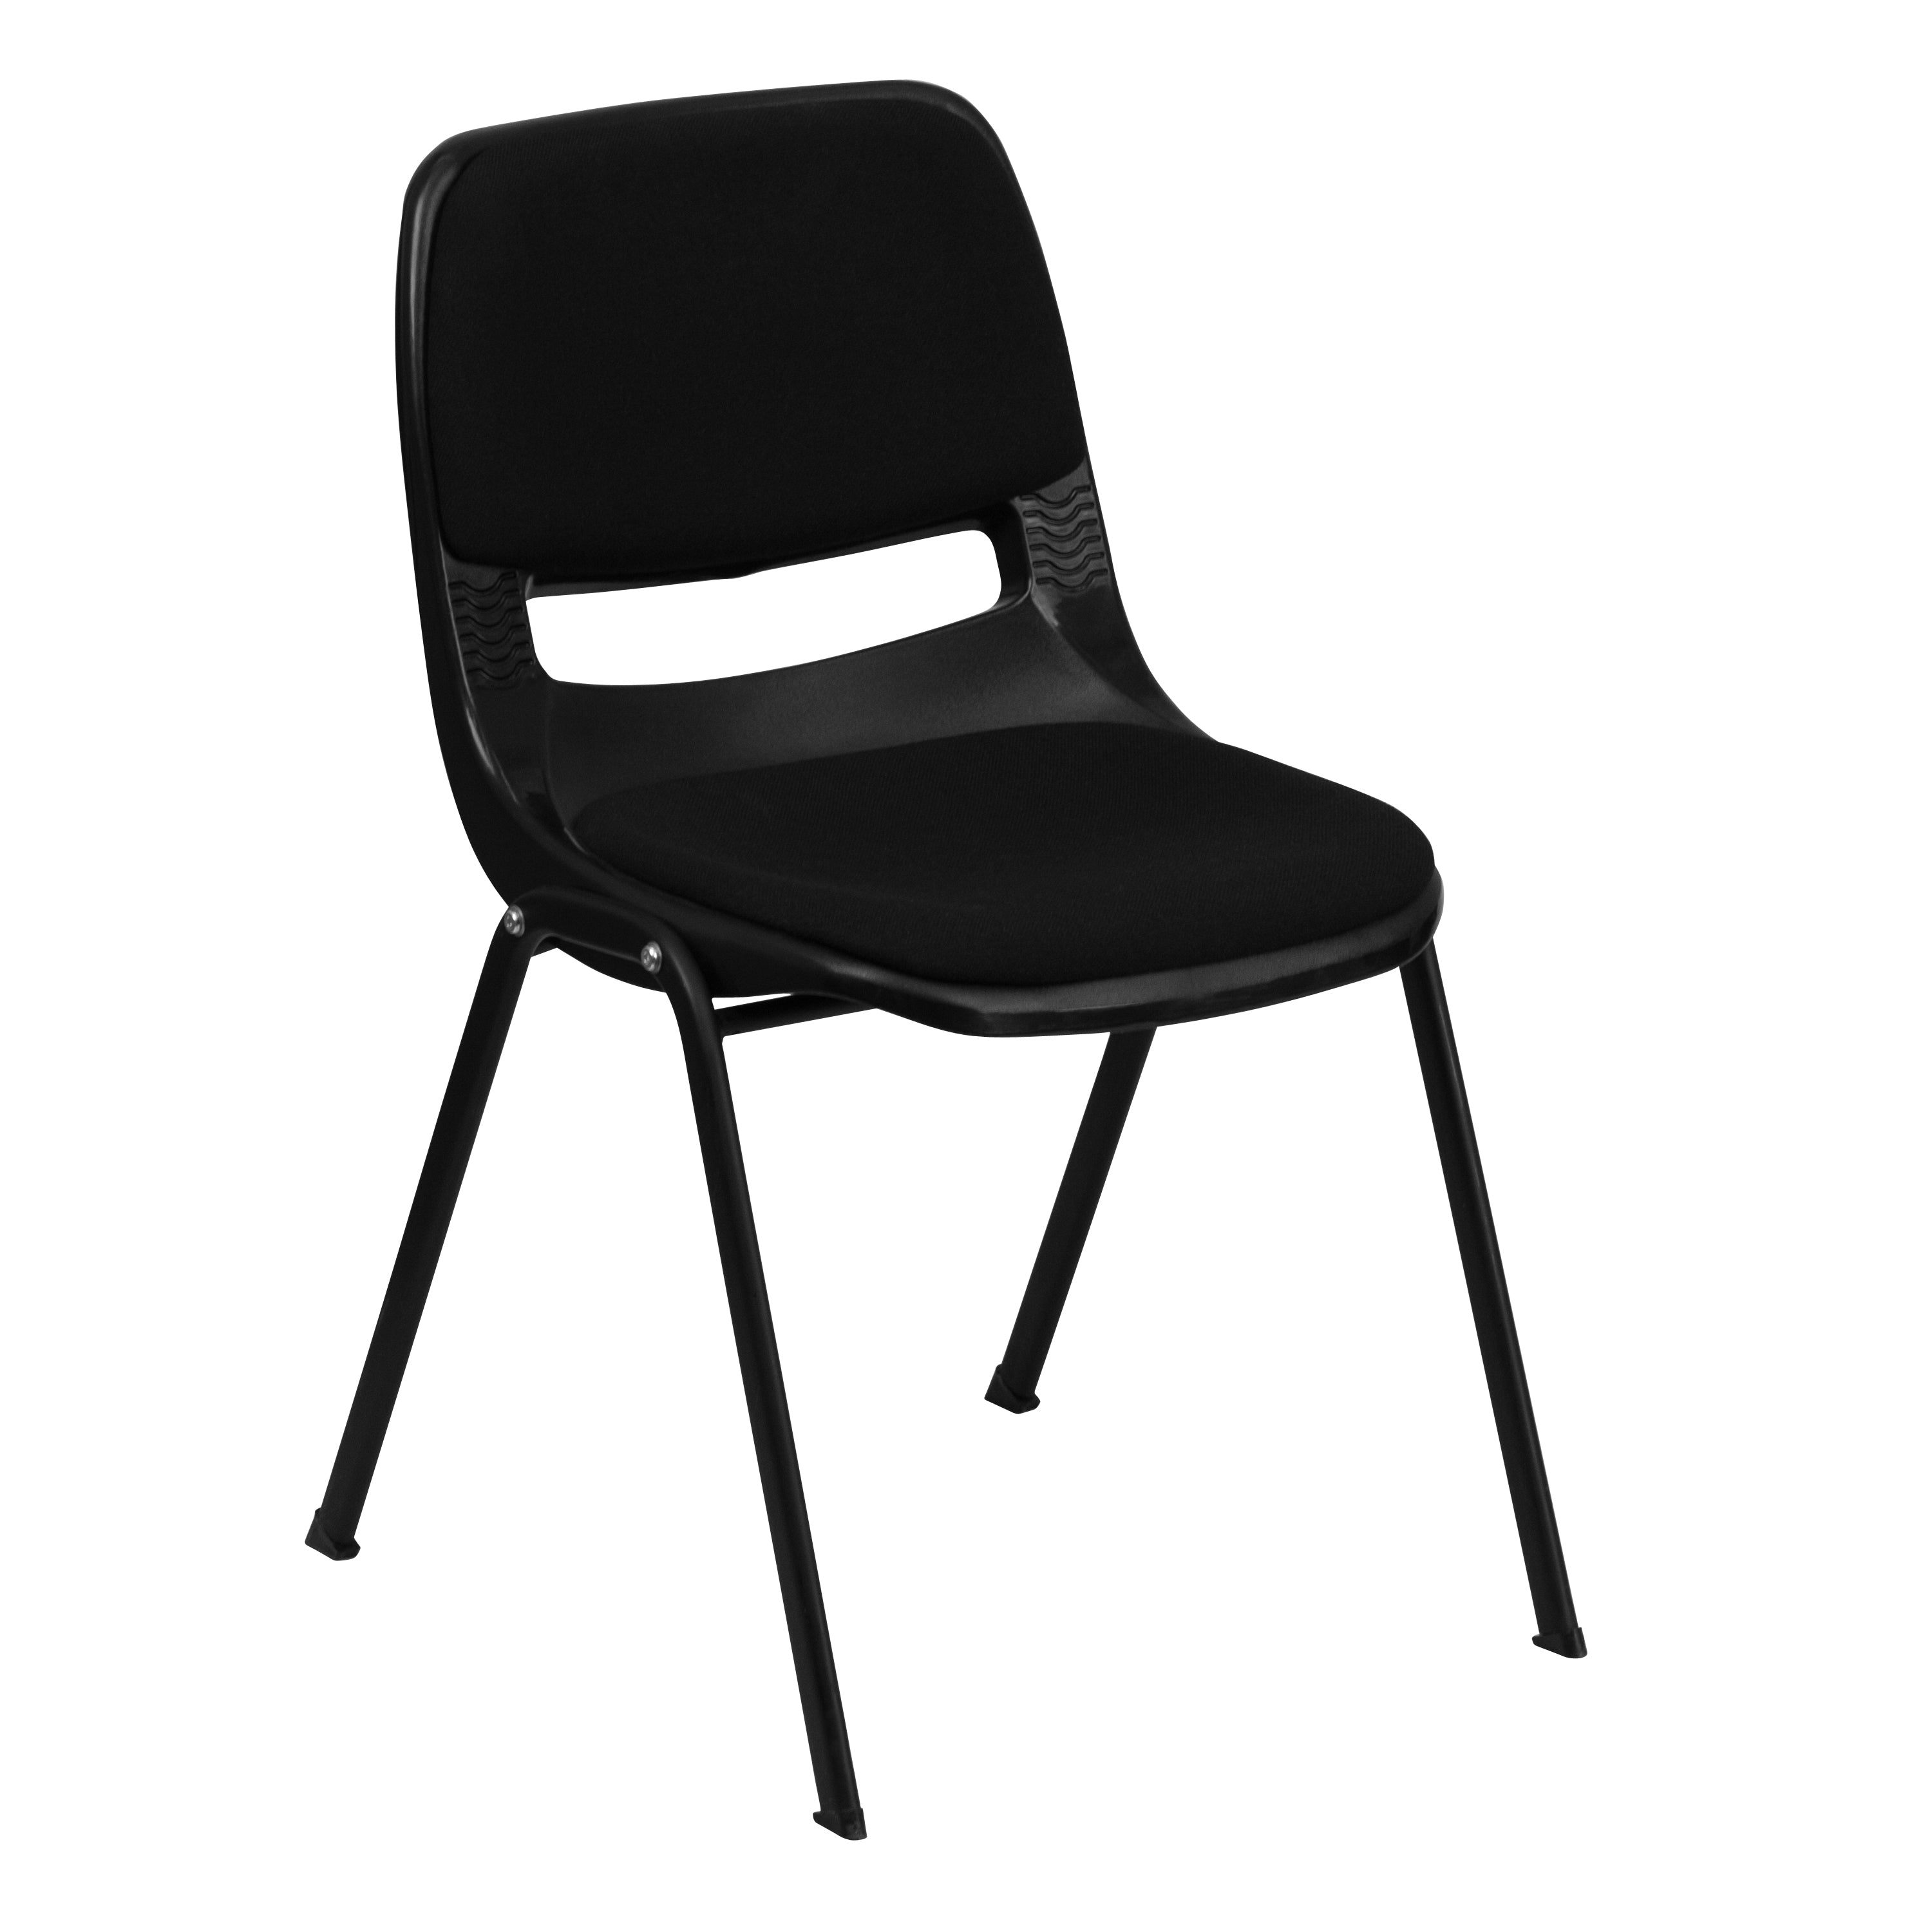 HERCULES Series 880 lb. Capacity Padded Ergonomic Shell Stack Chair with Metal Frame-Plastic Stack Chair-Flash Furniture-Wall2Wall Furnishings